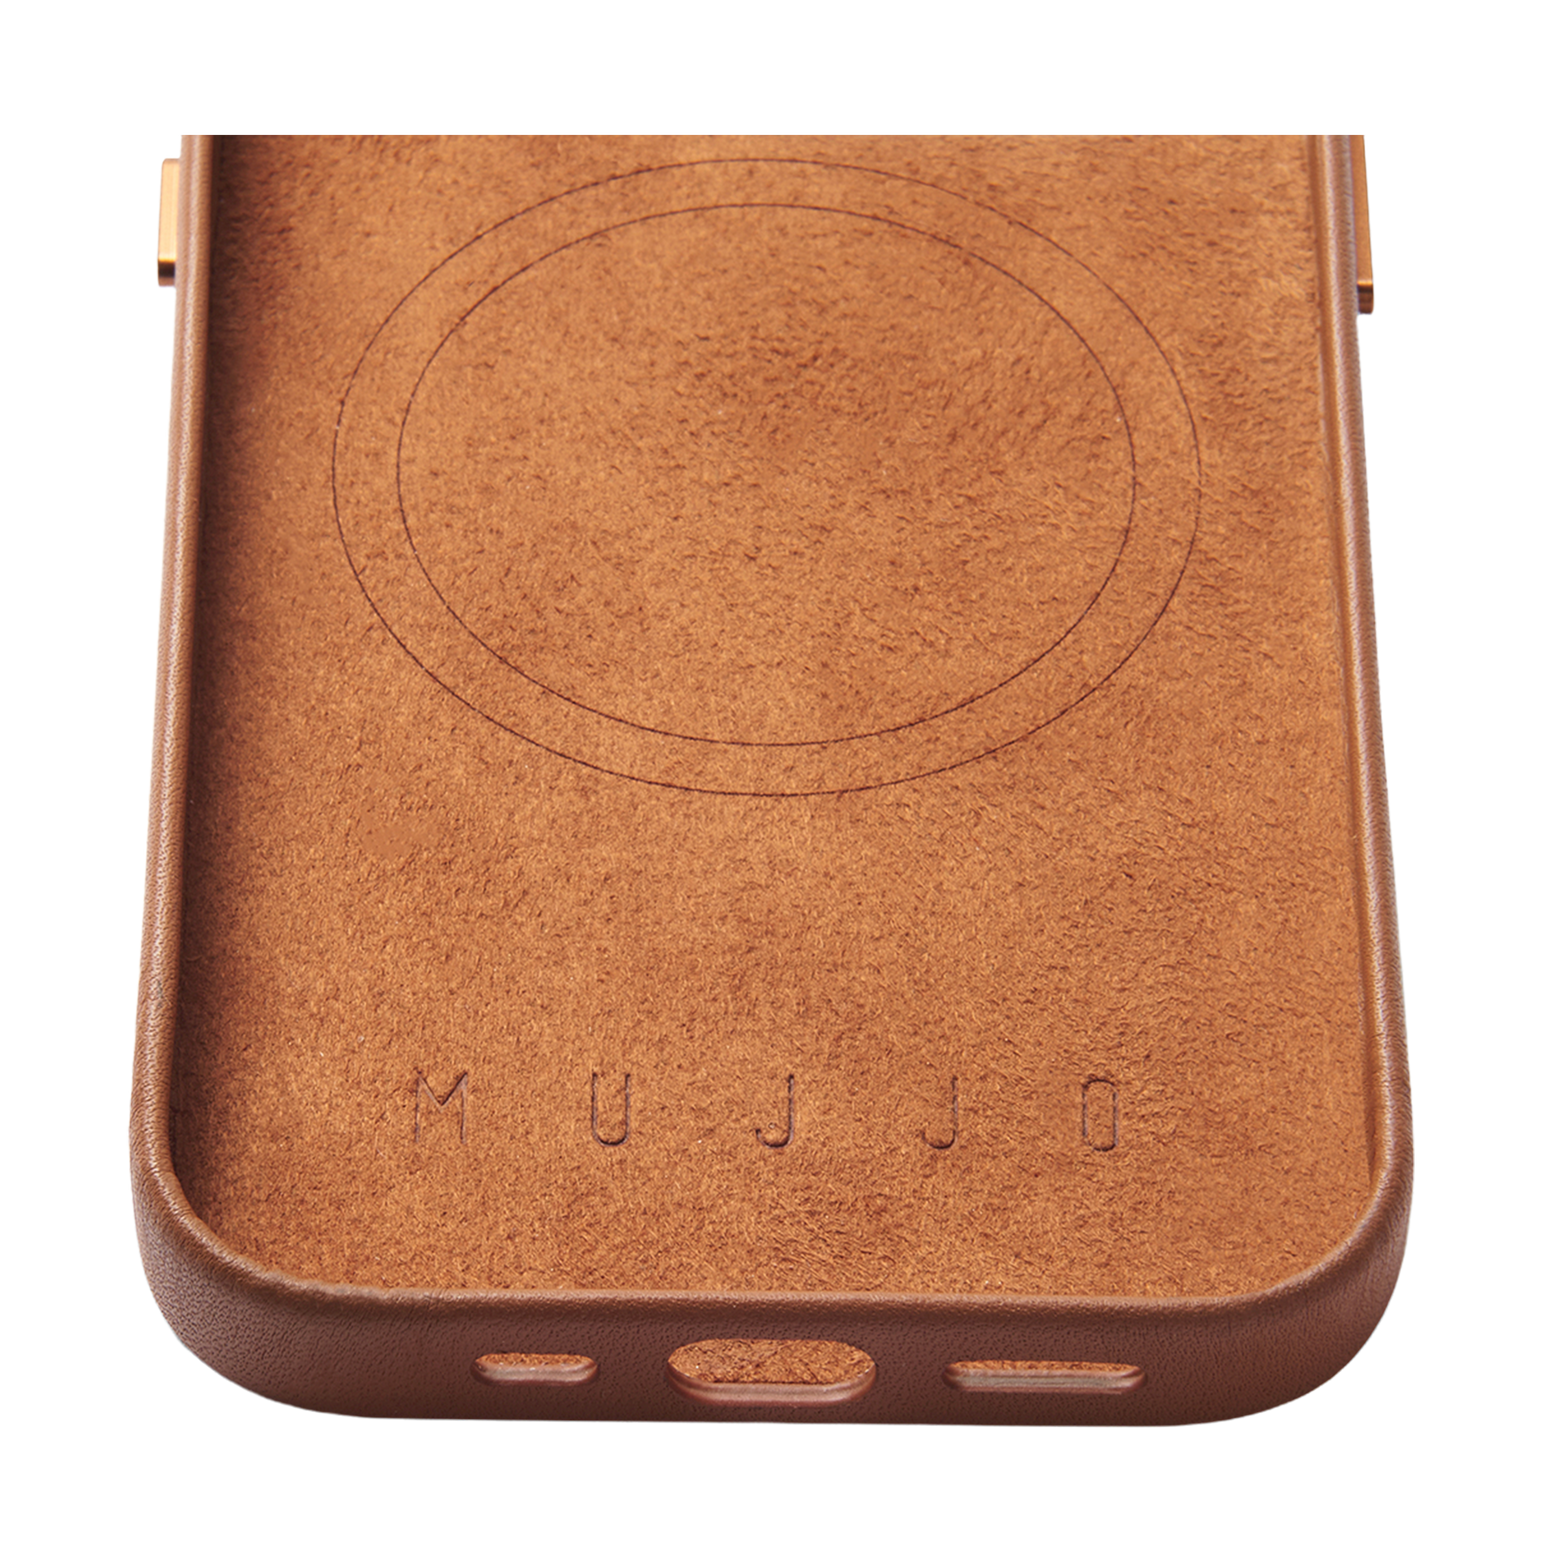 Mujjo Full Leather Case with MagSafe for iPhone 15 / 14 / 13 - Tan